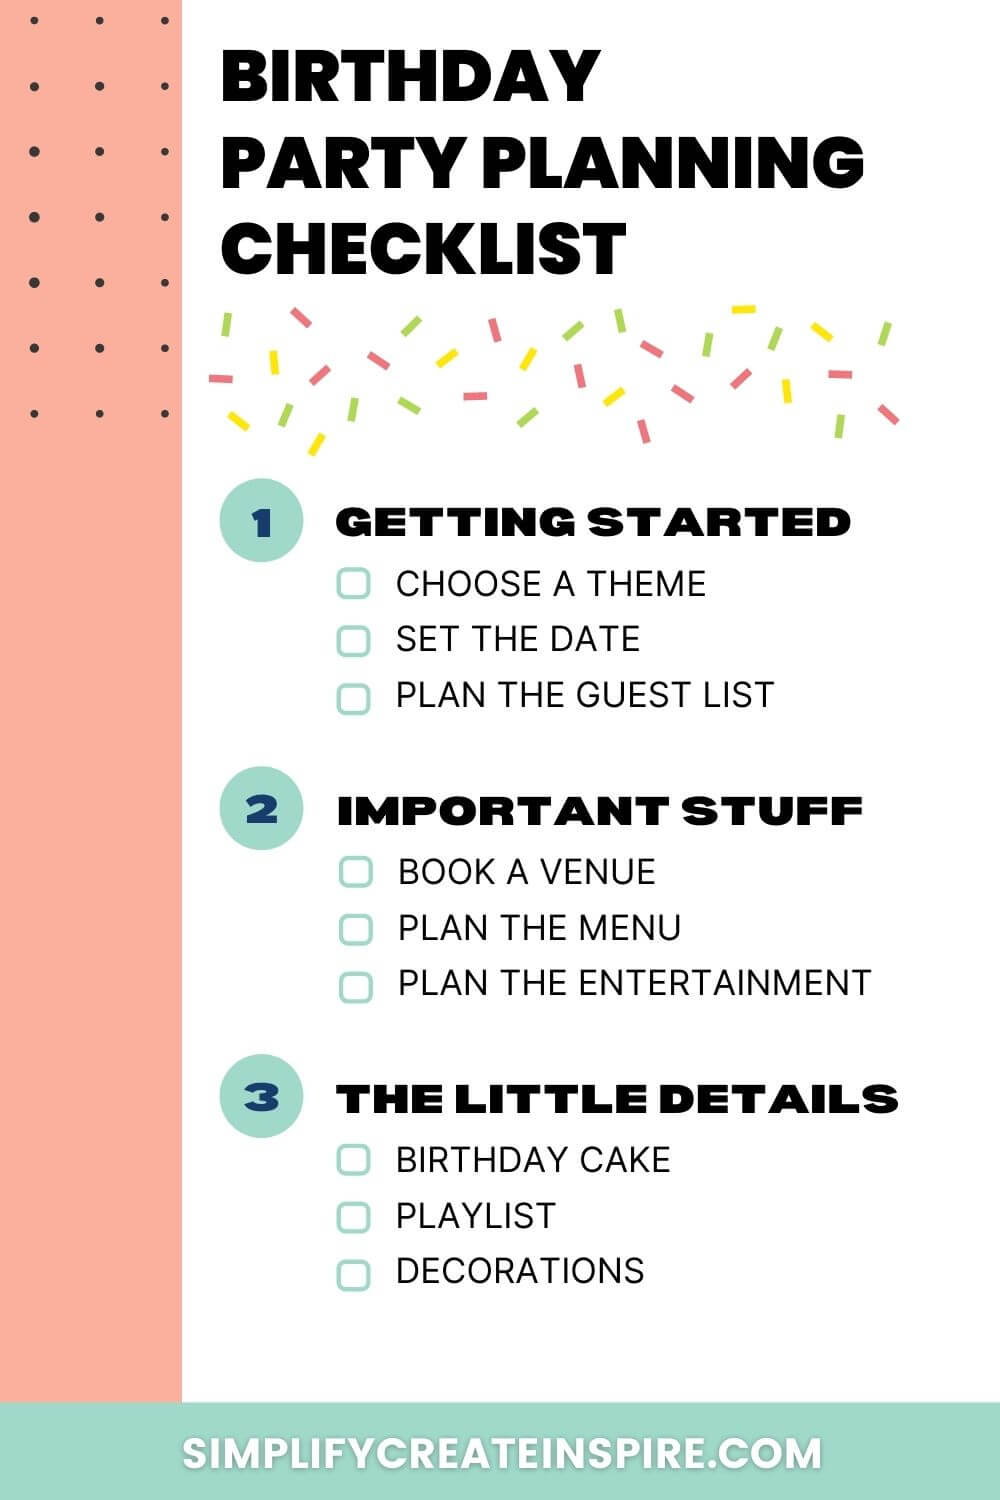 how to plan a birthday party checklist